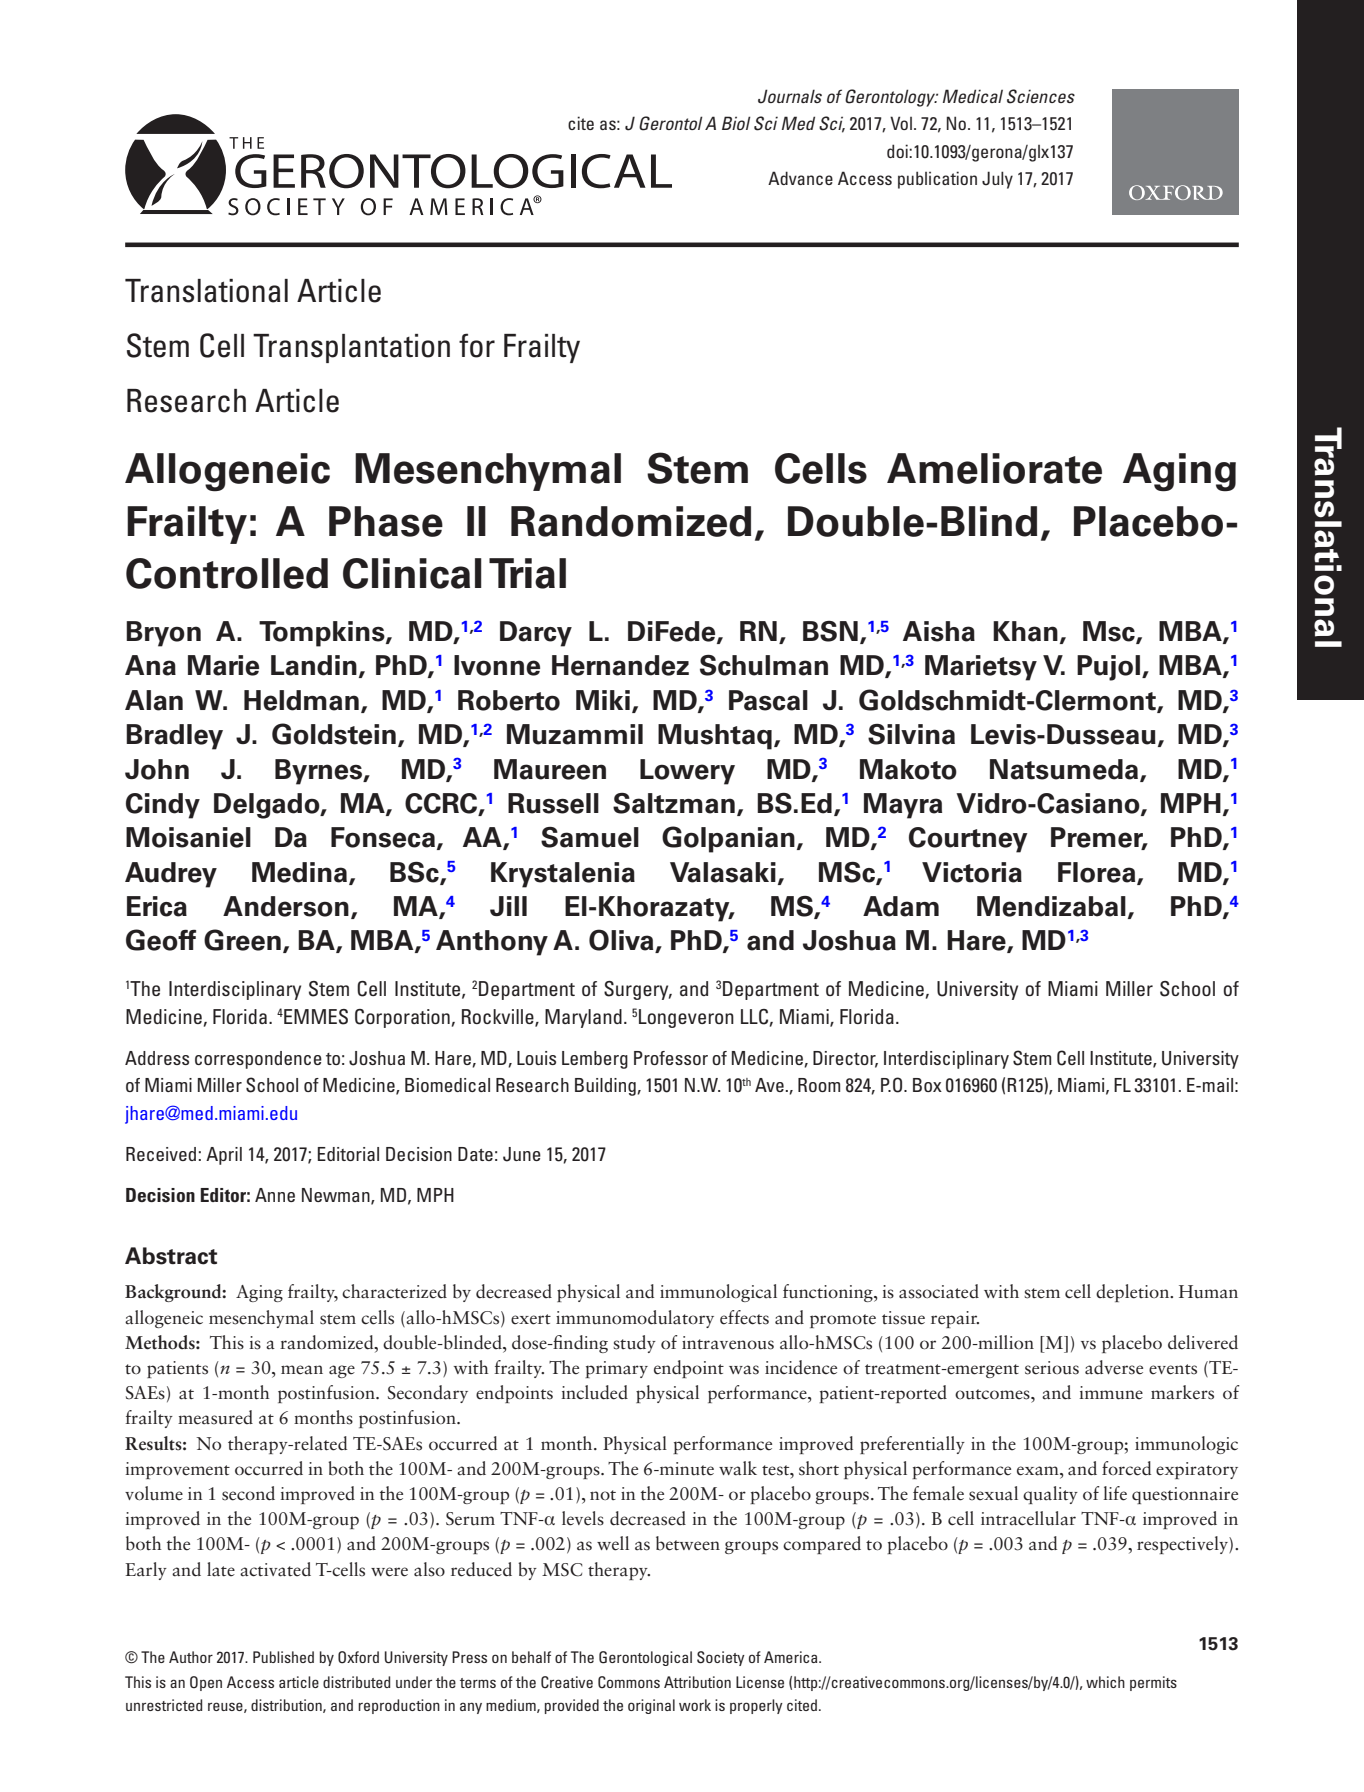 Allogeneic Mesenchymal Stem Cells Ameliorate Aging Frailty: A Phase ll Randomized, Double-Blind, Placebo-Controlled Clinical Trial